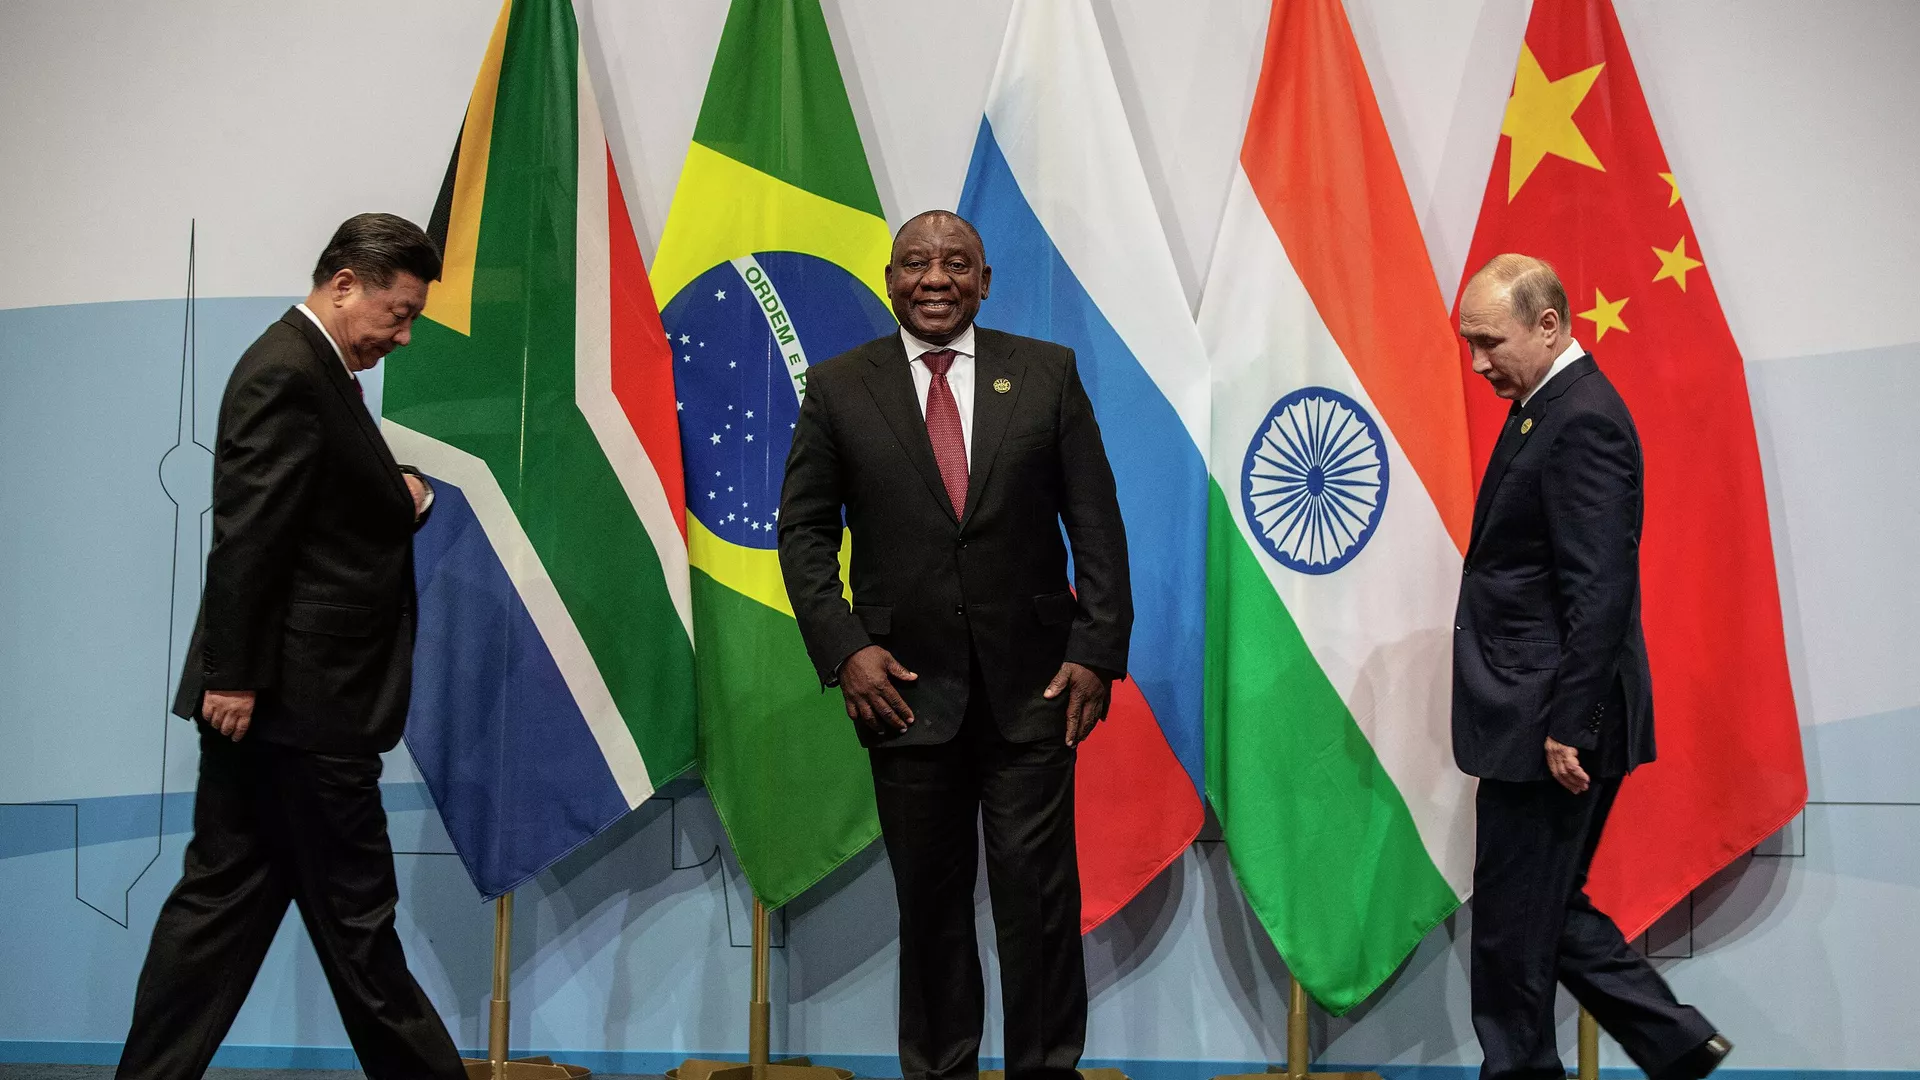 (LtoR) China's President Xi Jinping, South Africa's President Cyril Ramaphosa and Russia's President Vladimir Putin arrive to pose for a group picture during the 10th BRICS (acronym for the grouping of the world's leading emerging economies, namely Brazil, Russia, India, China and South Africa) summit on July 26, 2018 at the Sandton Convention Centre in Johannesburg, South Africa. - Sputnik International, 1920, 21.08.2023